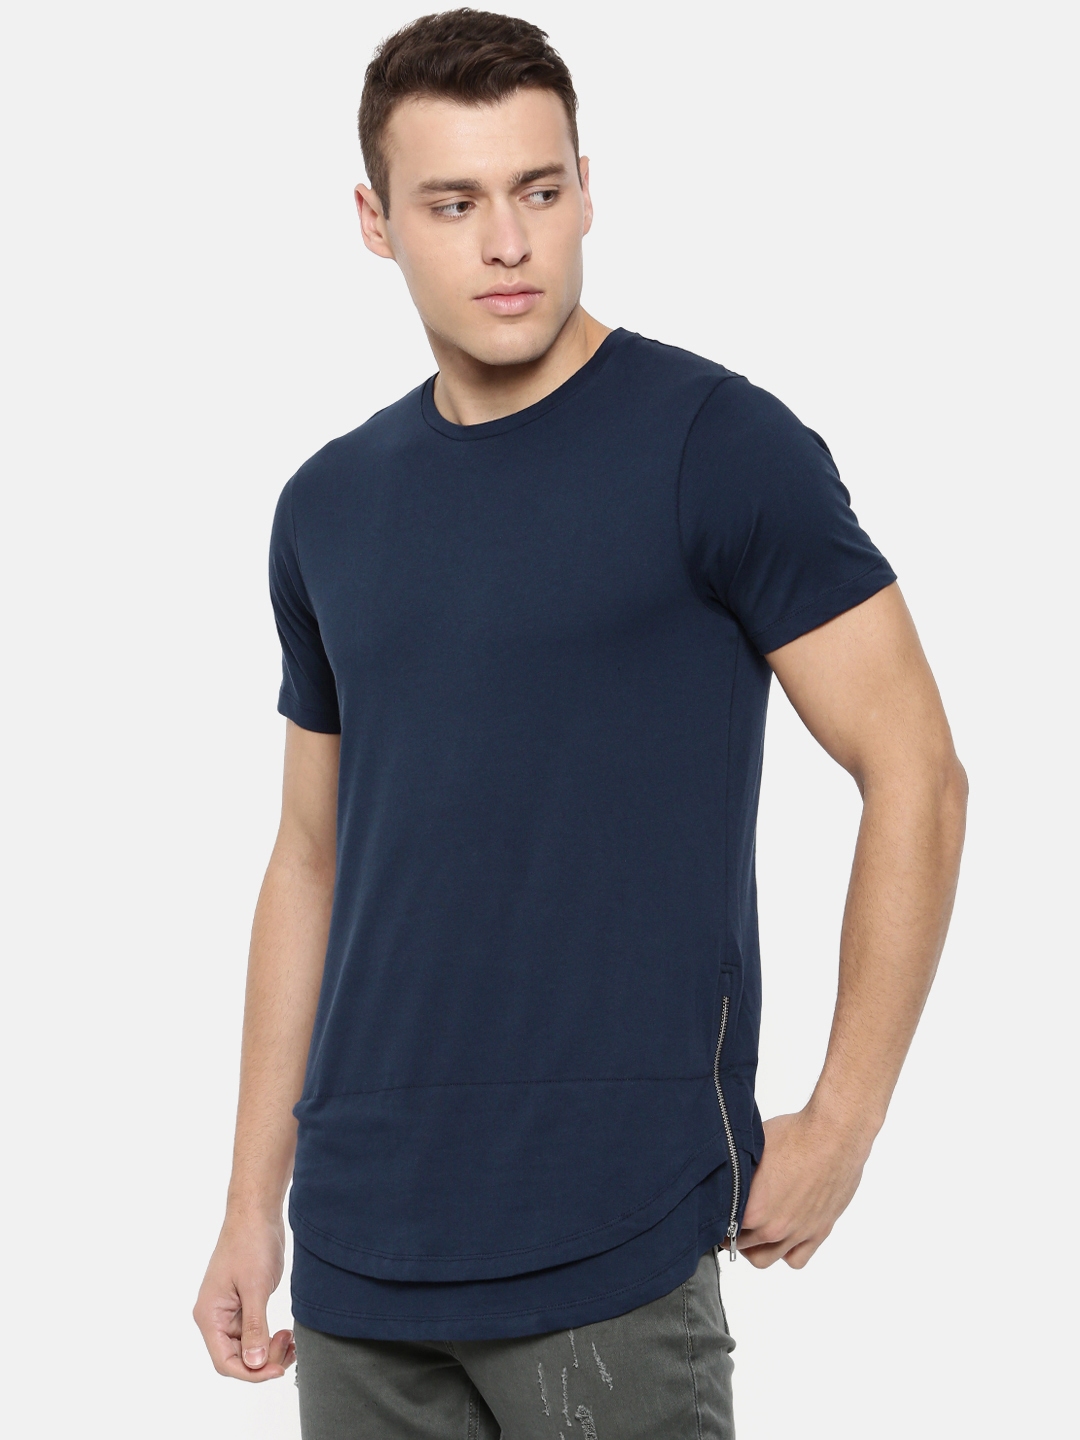 Buy SKULT By Shahid Kapoor Men Navy Blue Solid Round Neck Pure Cotton T ...